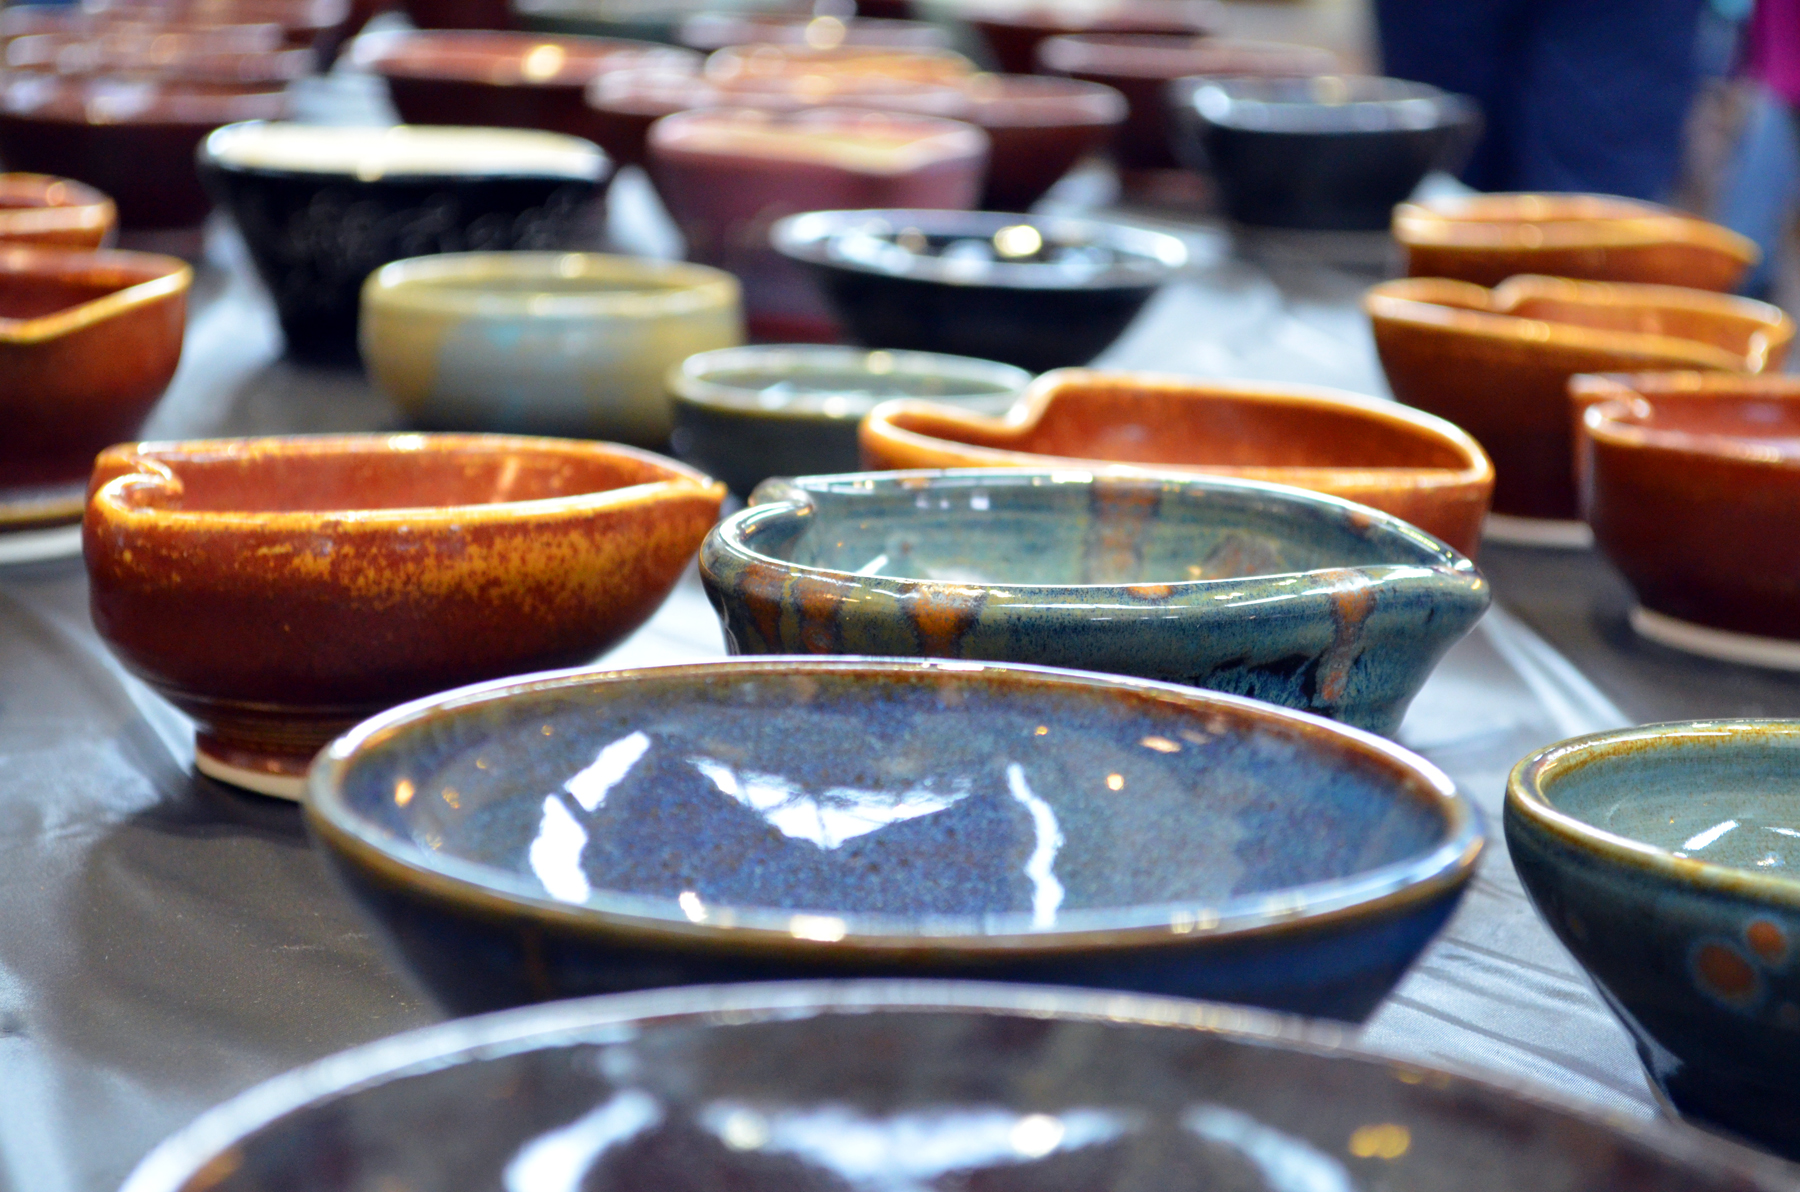 Some of the hand-crafted bowls made by local Victoria artisans.